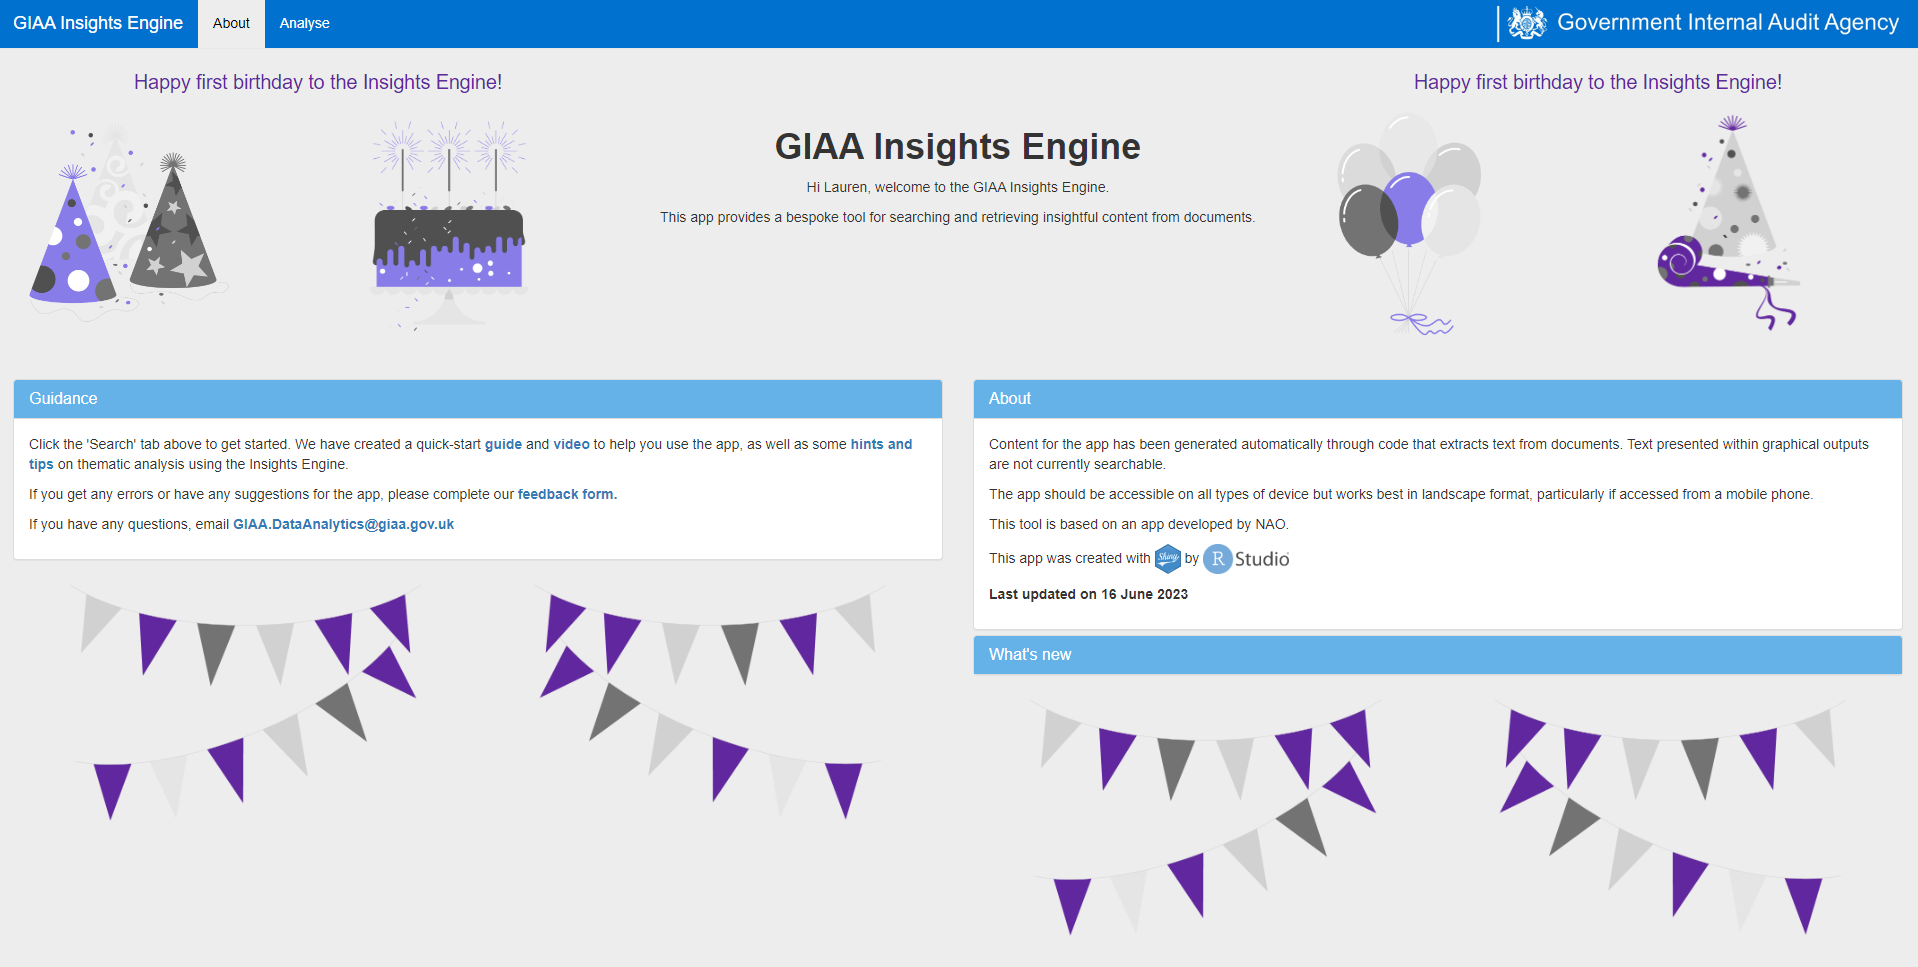 Screenshot of the GIAA insights engine with images of celebration